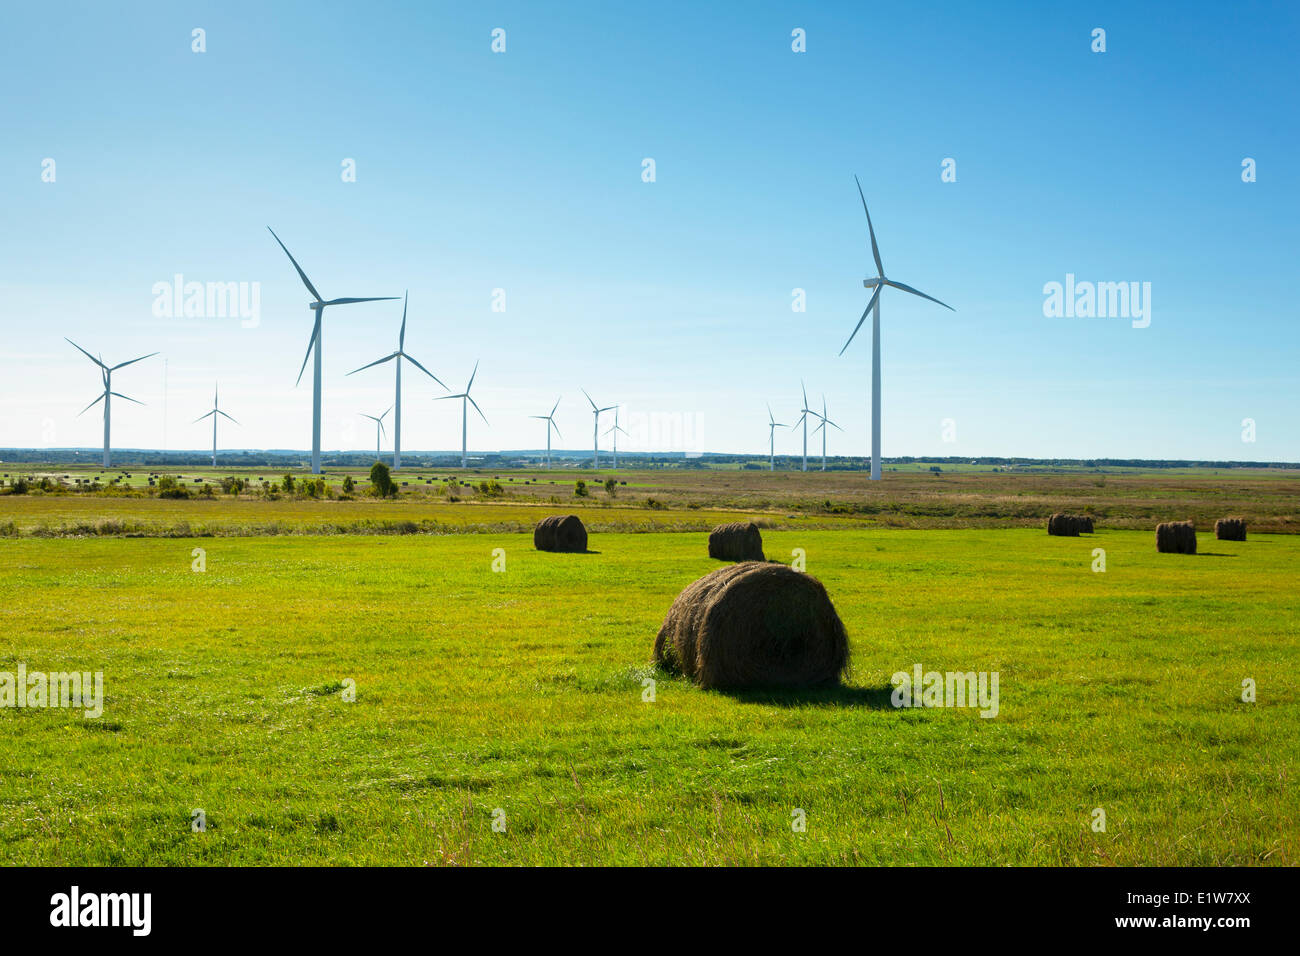 The 31.5 MW Amherst I wind farm is located in Cumberland County, Nova Scotia near the town of Amherst, Nova scotia, Canada Stock Photo